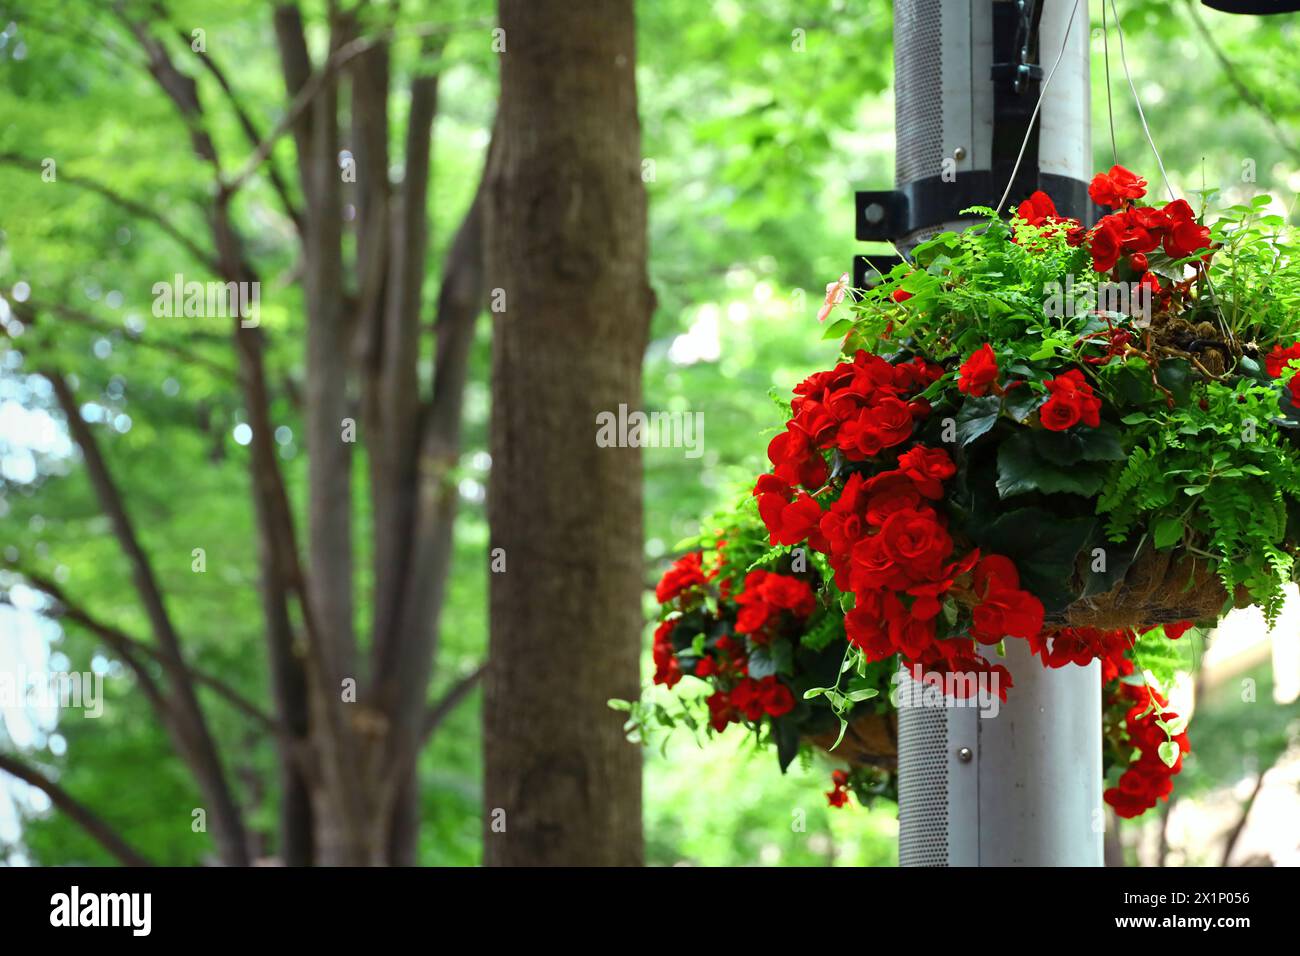 A pot of ranunculus decorated with a lamp post in a town with beautiful fresh greenery lined with roadside trees Stock Photo